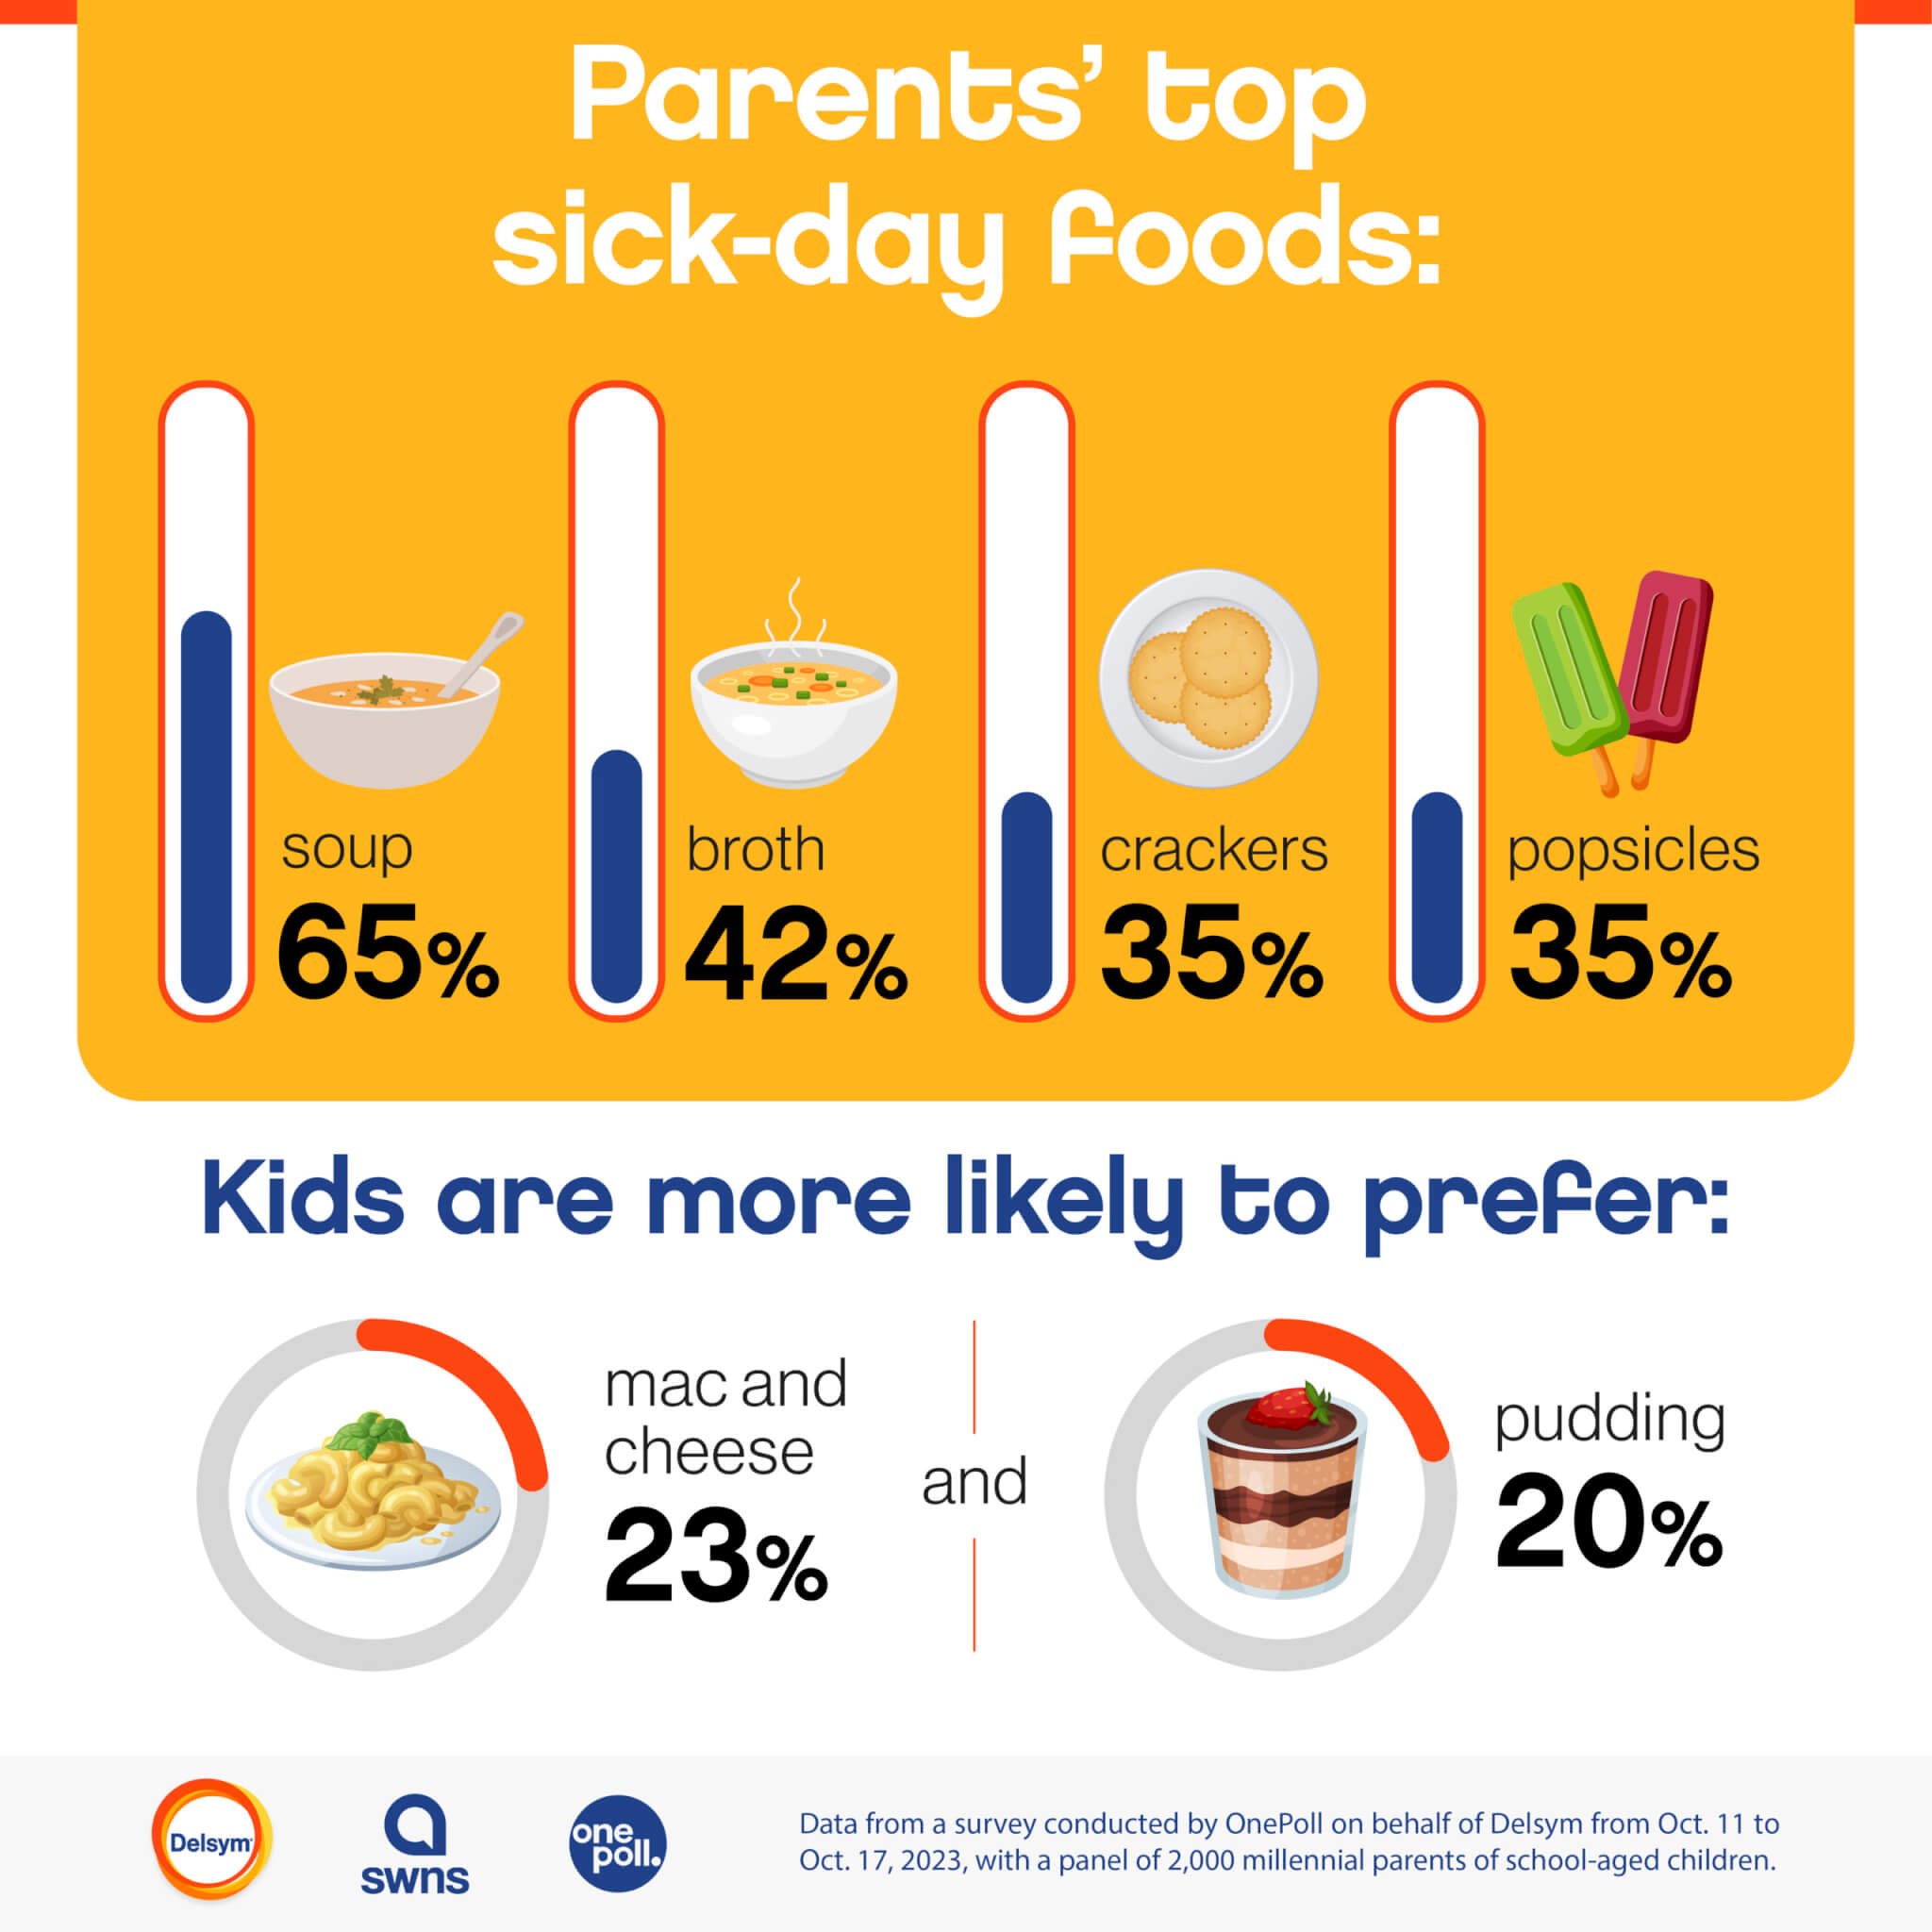 Infographic on the types of foods parent and children prefer to eat when sick.